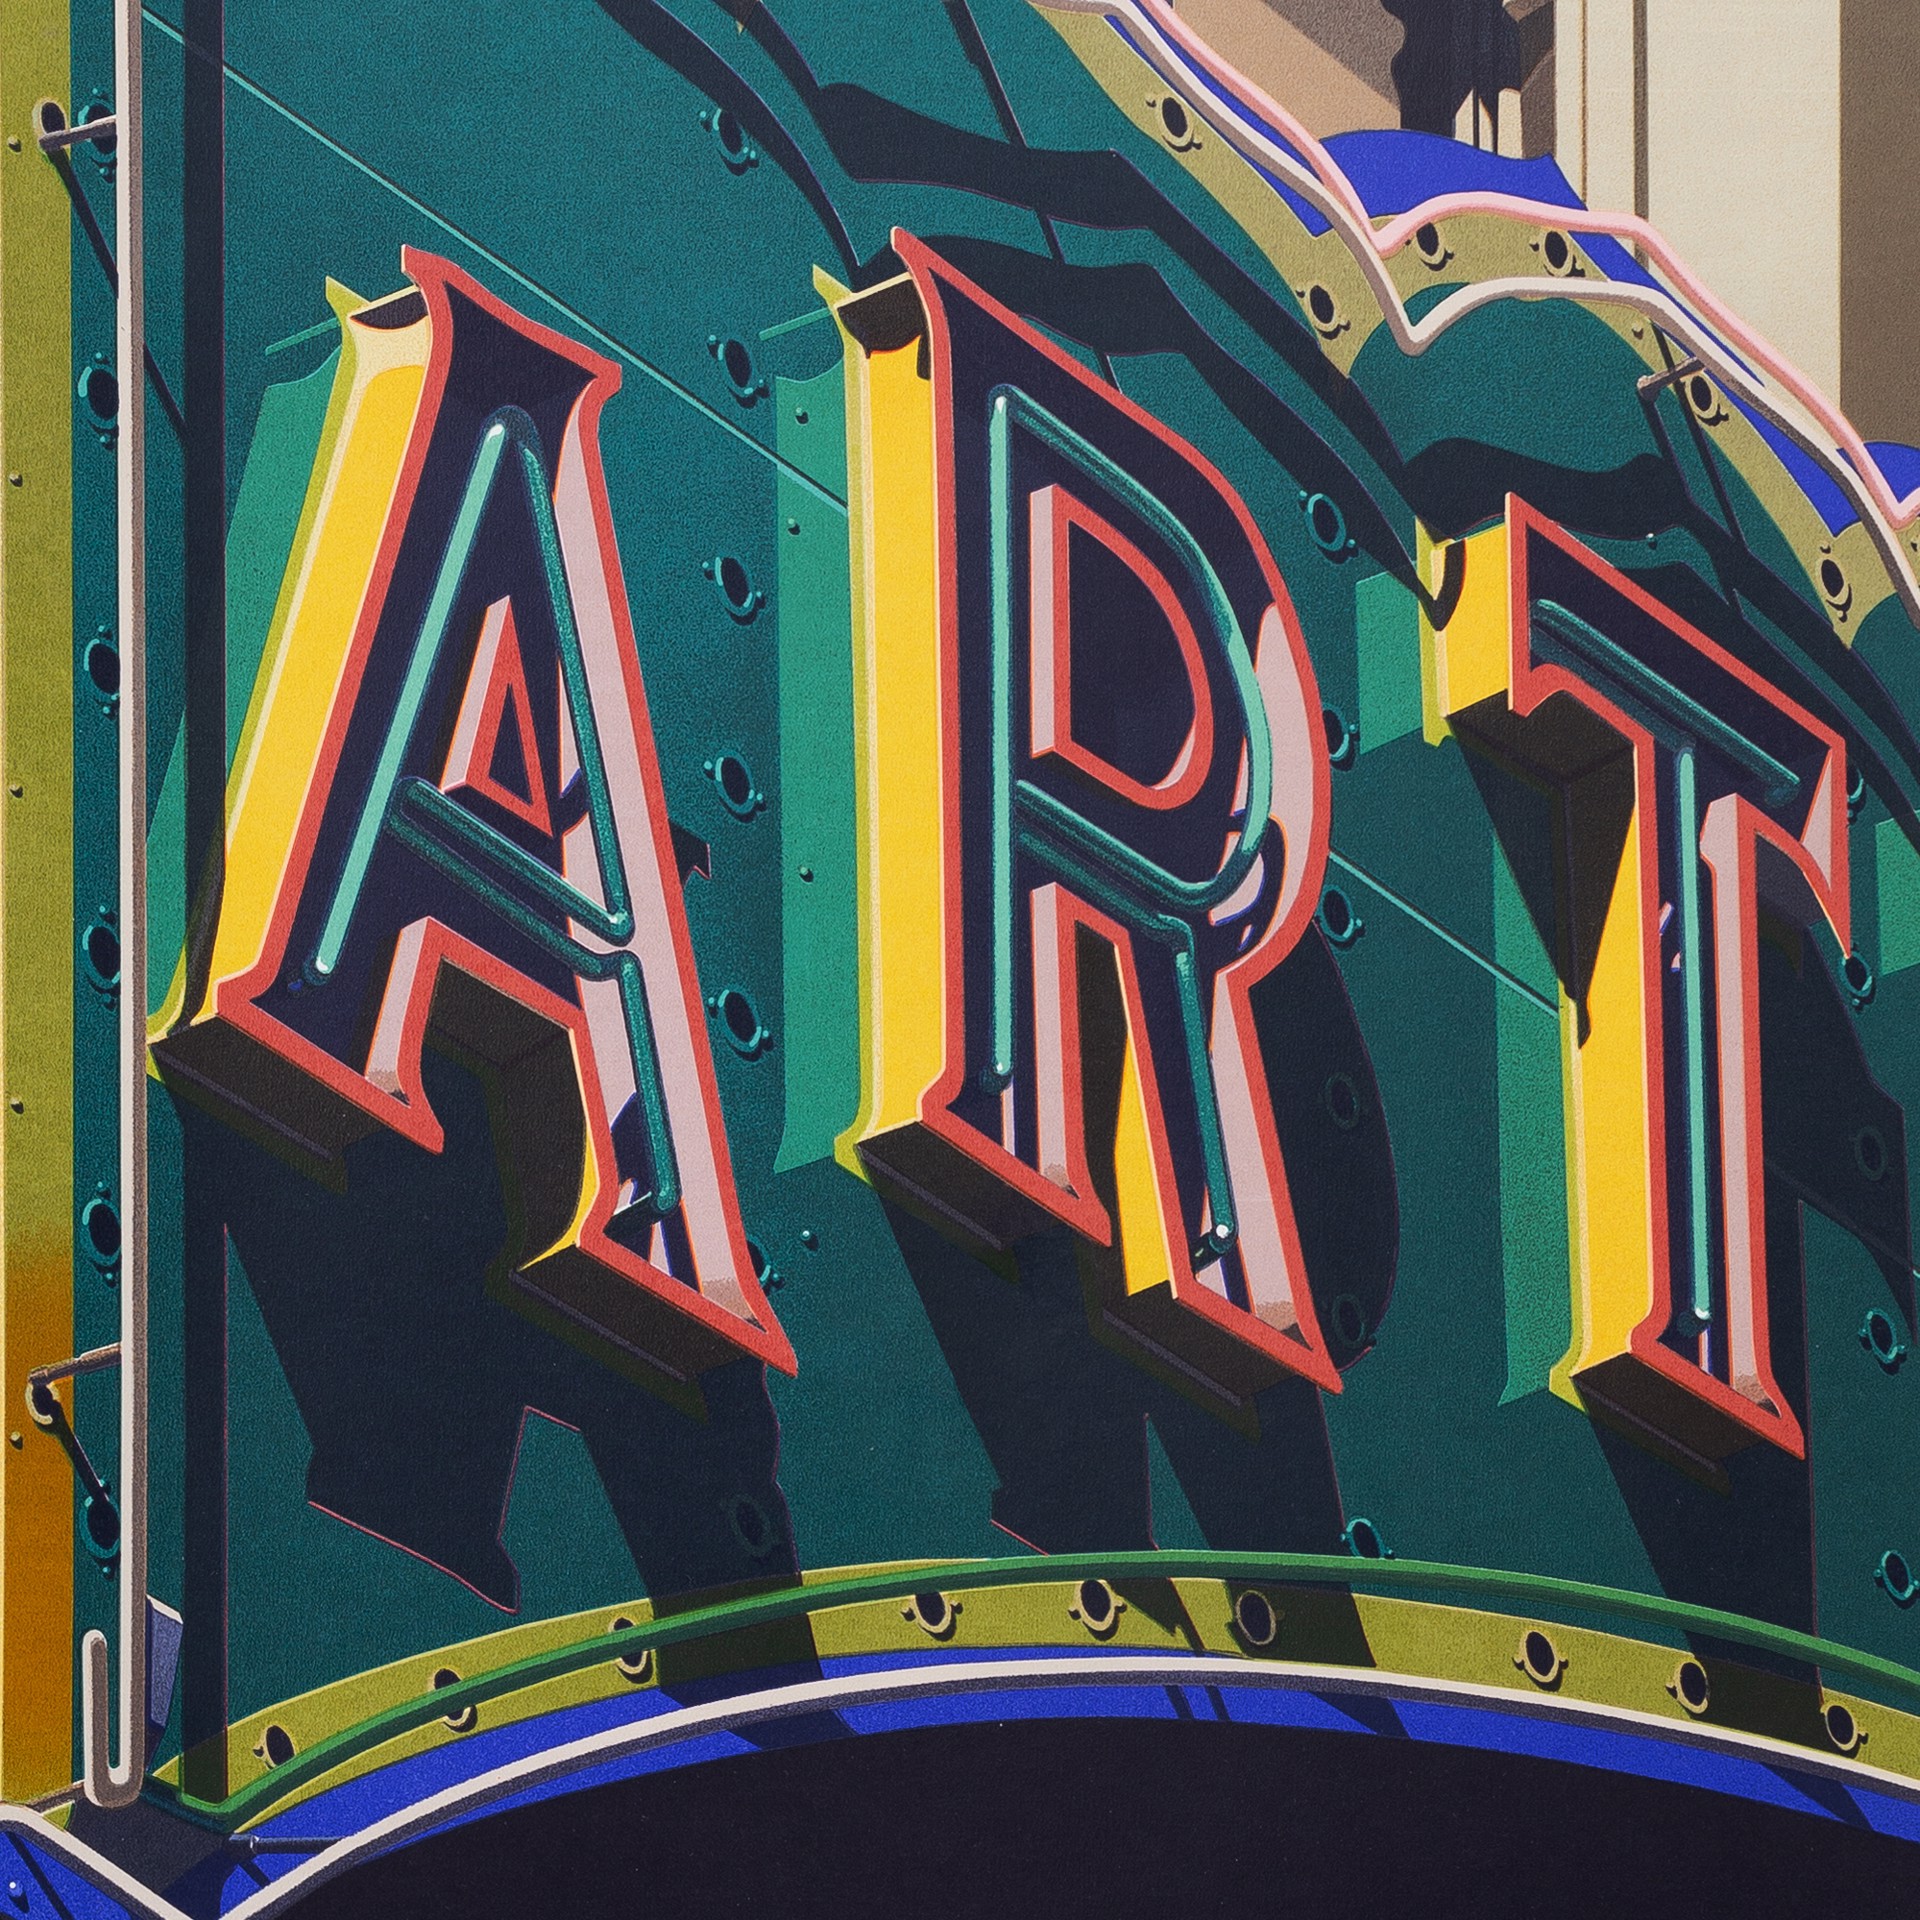 Art (from American Signs portfolio) by Robert Cottingham